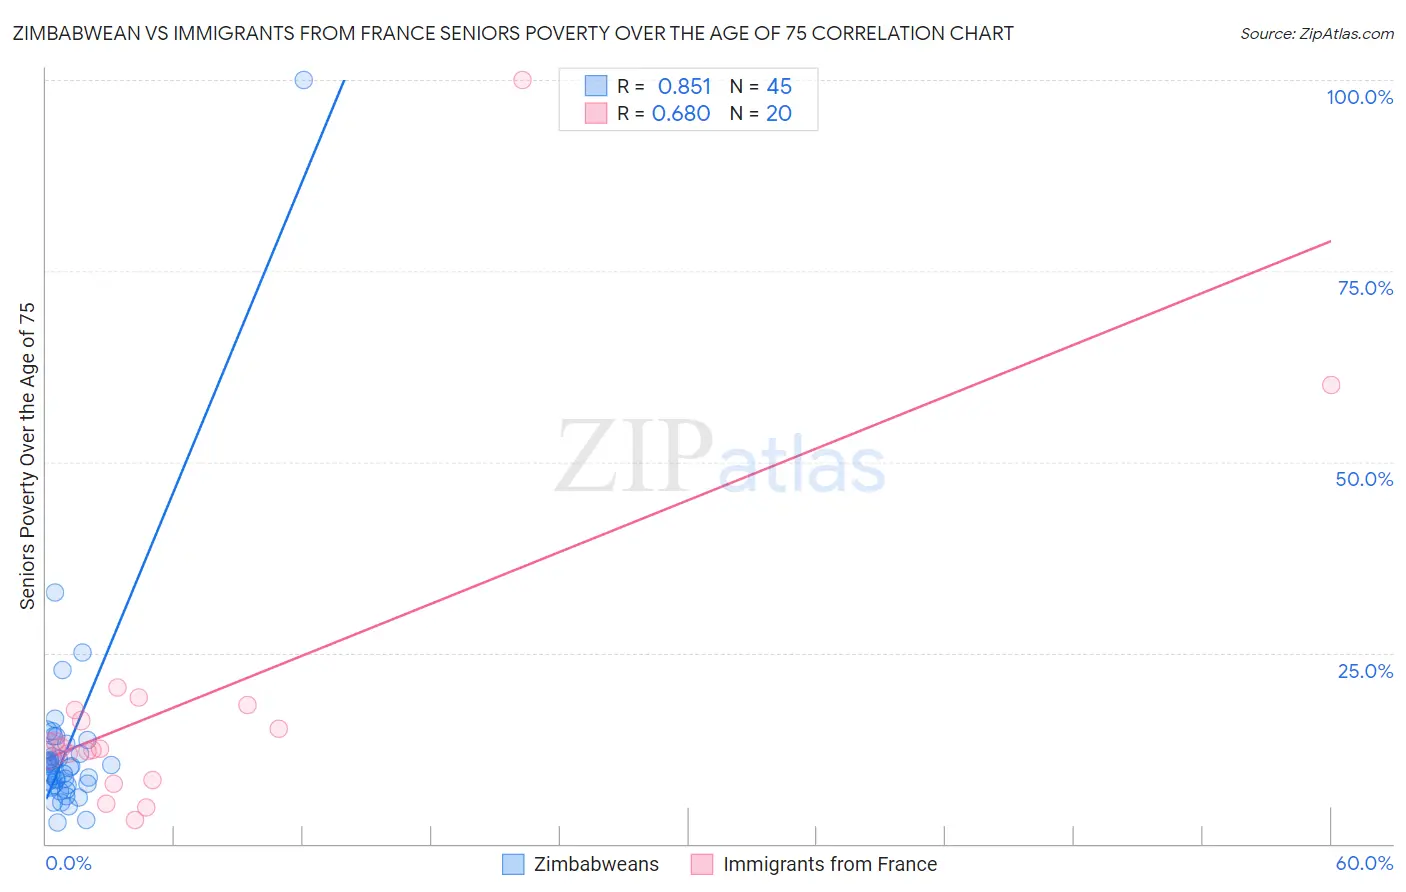 Zimbabwean vs Immigrants from France Seniors Poverty Over the Age of 75